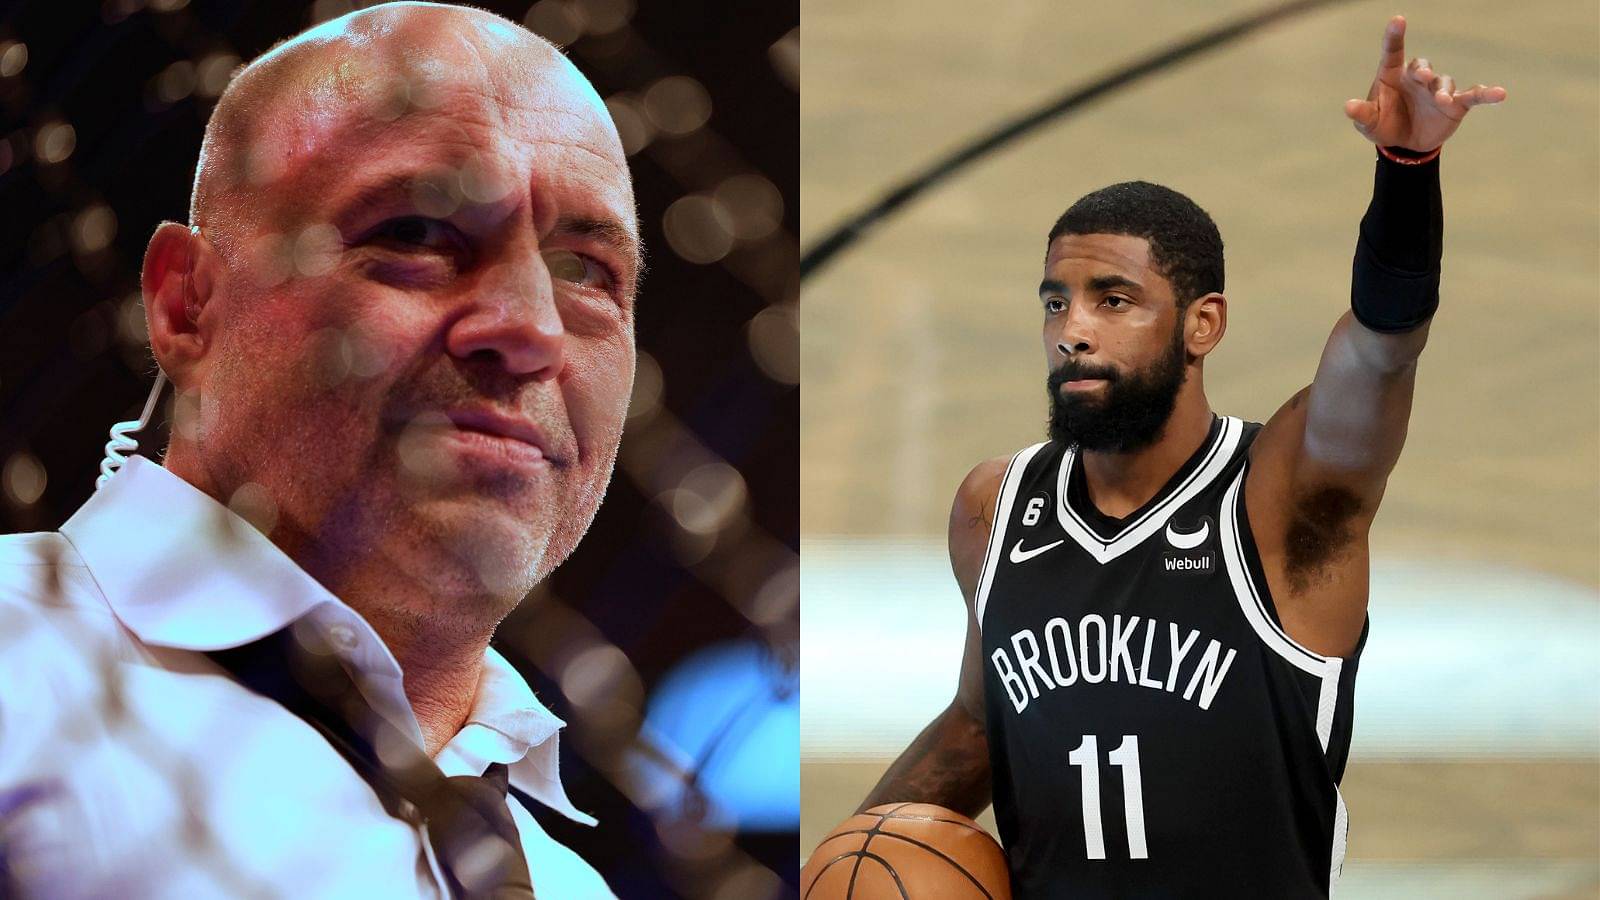 Kyrie Irving Just Posted a Link to What Amazon is Selling? Fu**ing Wild!” Joe Rogan Calls Out Hypocrisy in 6ft 2 NBA Stars Anti-Semitic Fiasco